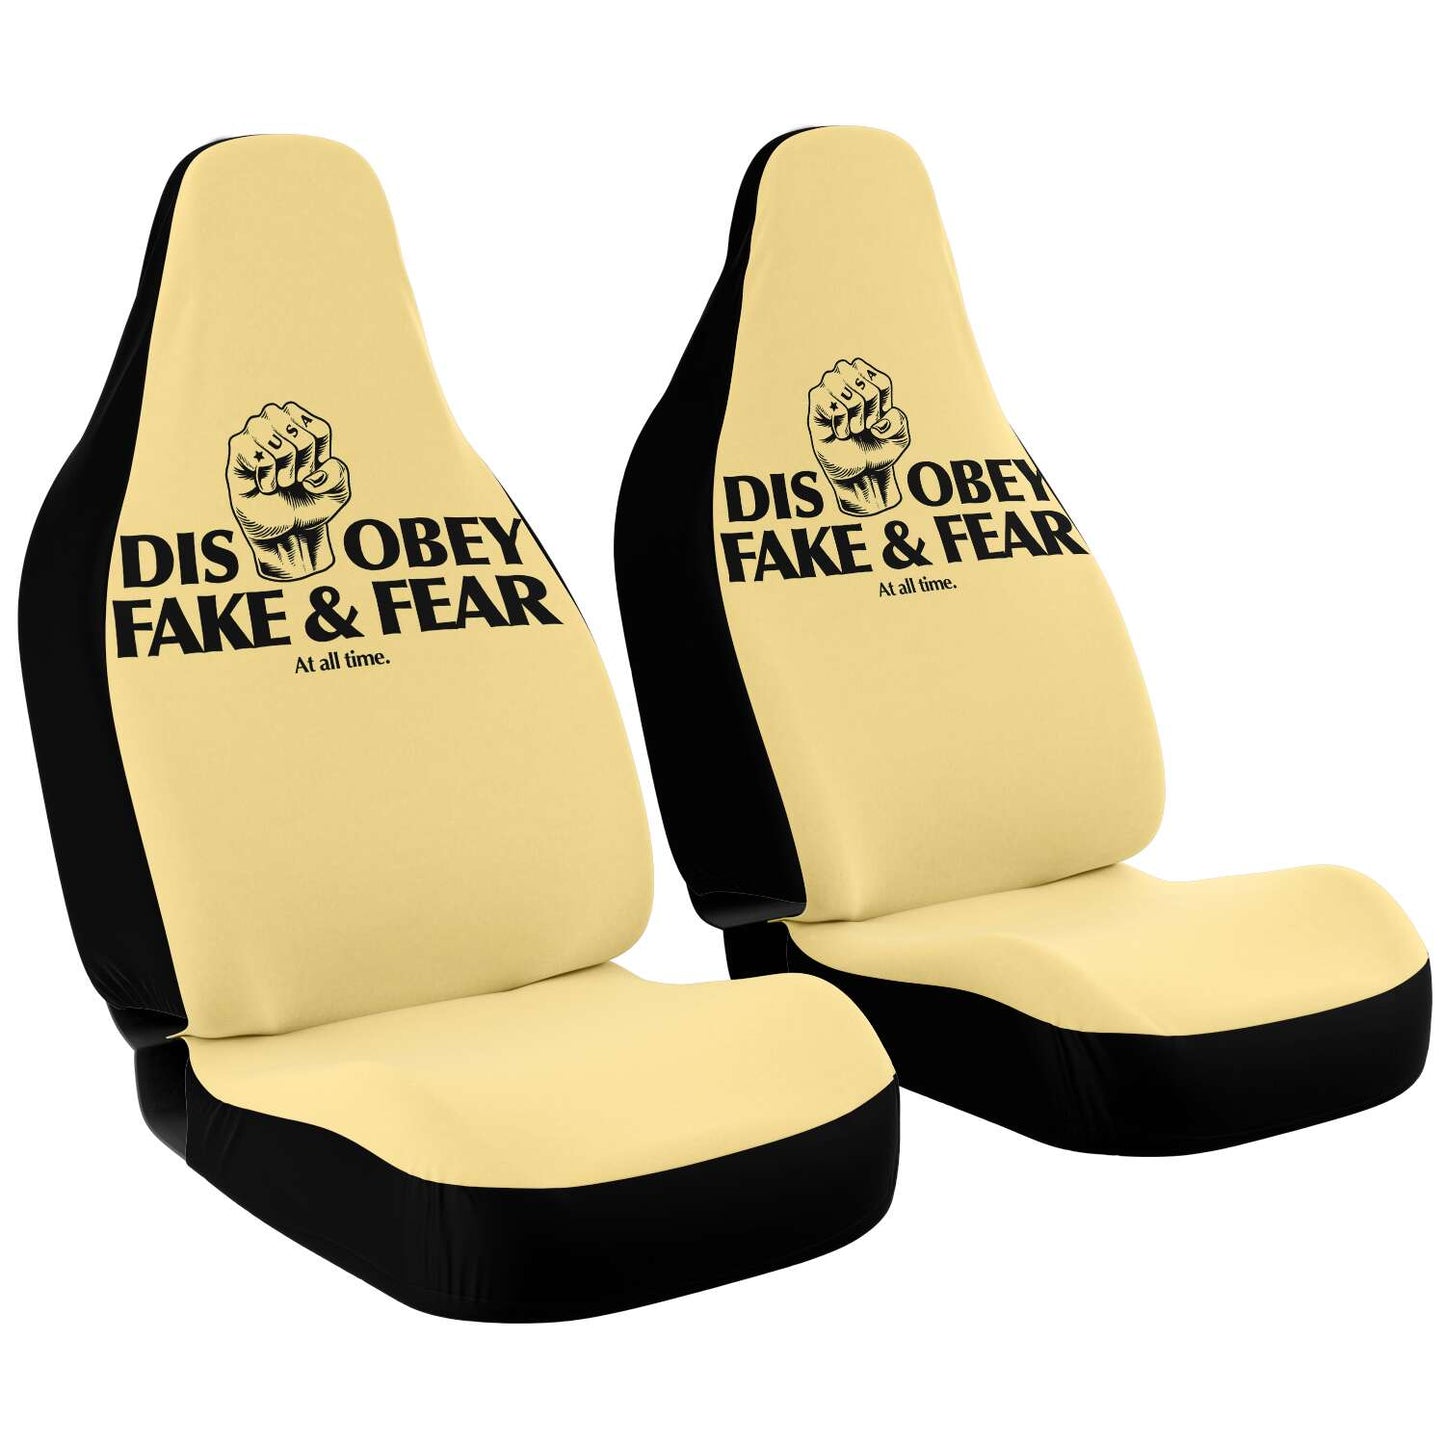 Disobey ✊🏻 Fake <br> & Fear At All Time <br> Seat Covers Cream